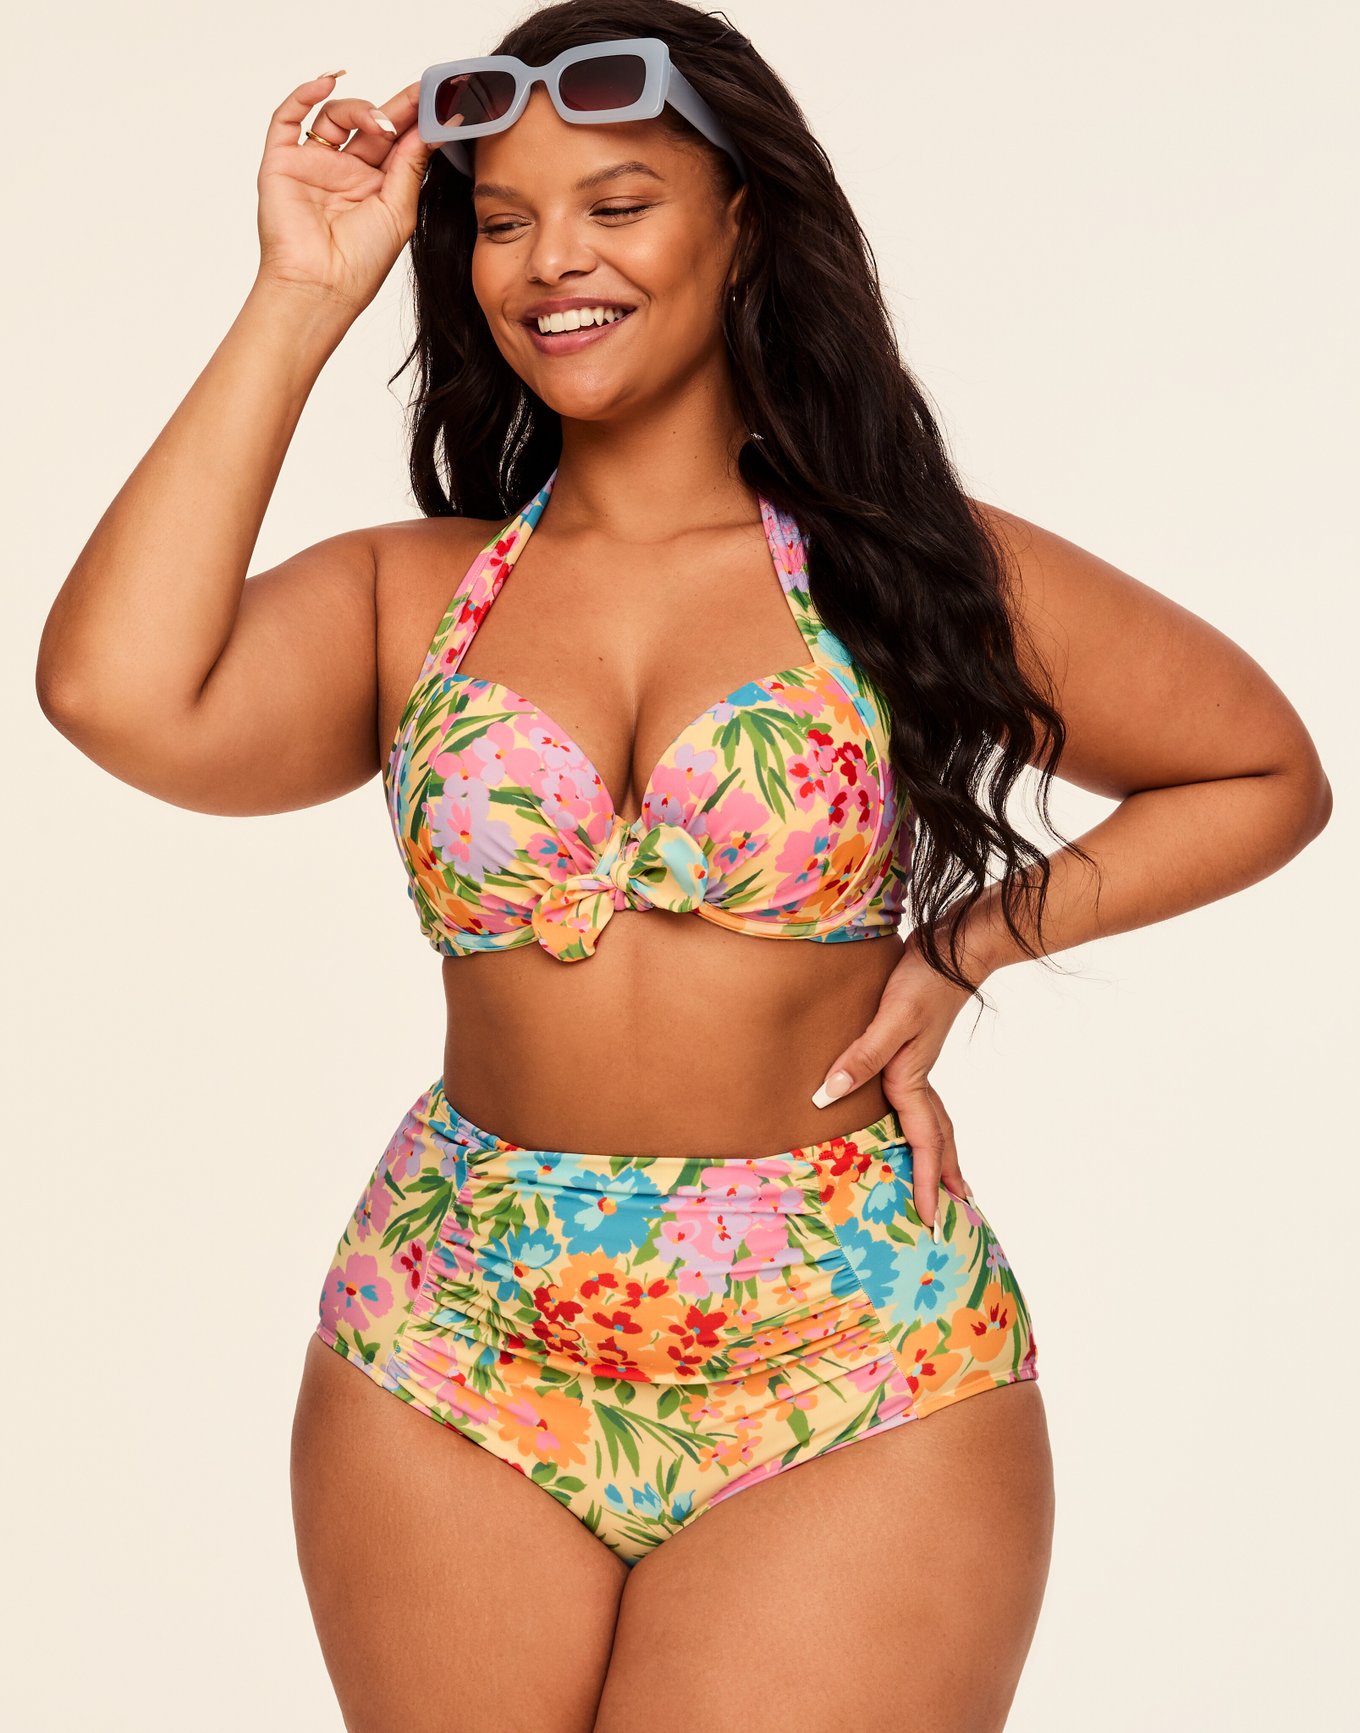 Larger Cup Sizes DD to H Cup Sized Swimwear